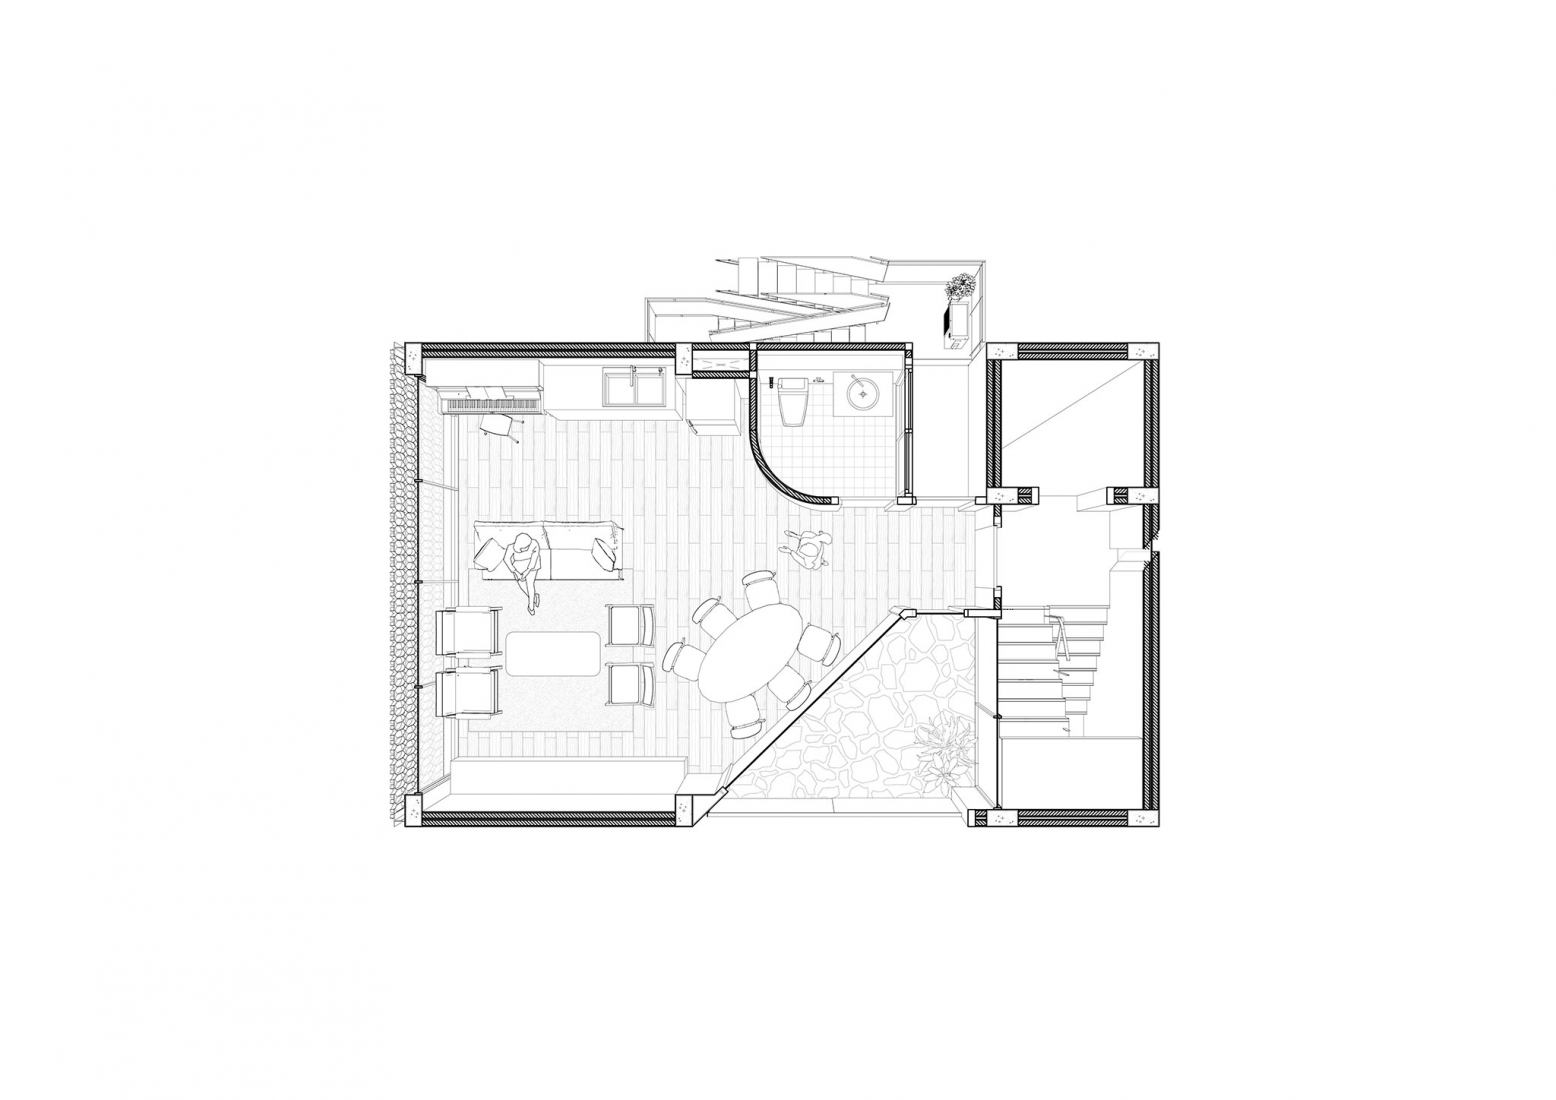 Dwelling with requirements. House R3 by Phtaa living design | The ...